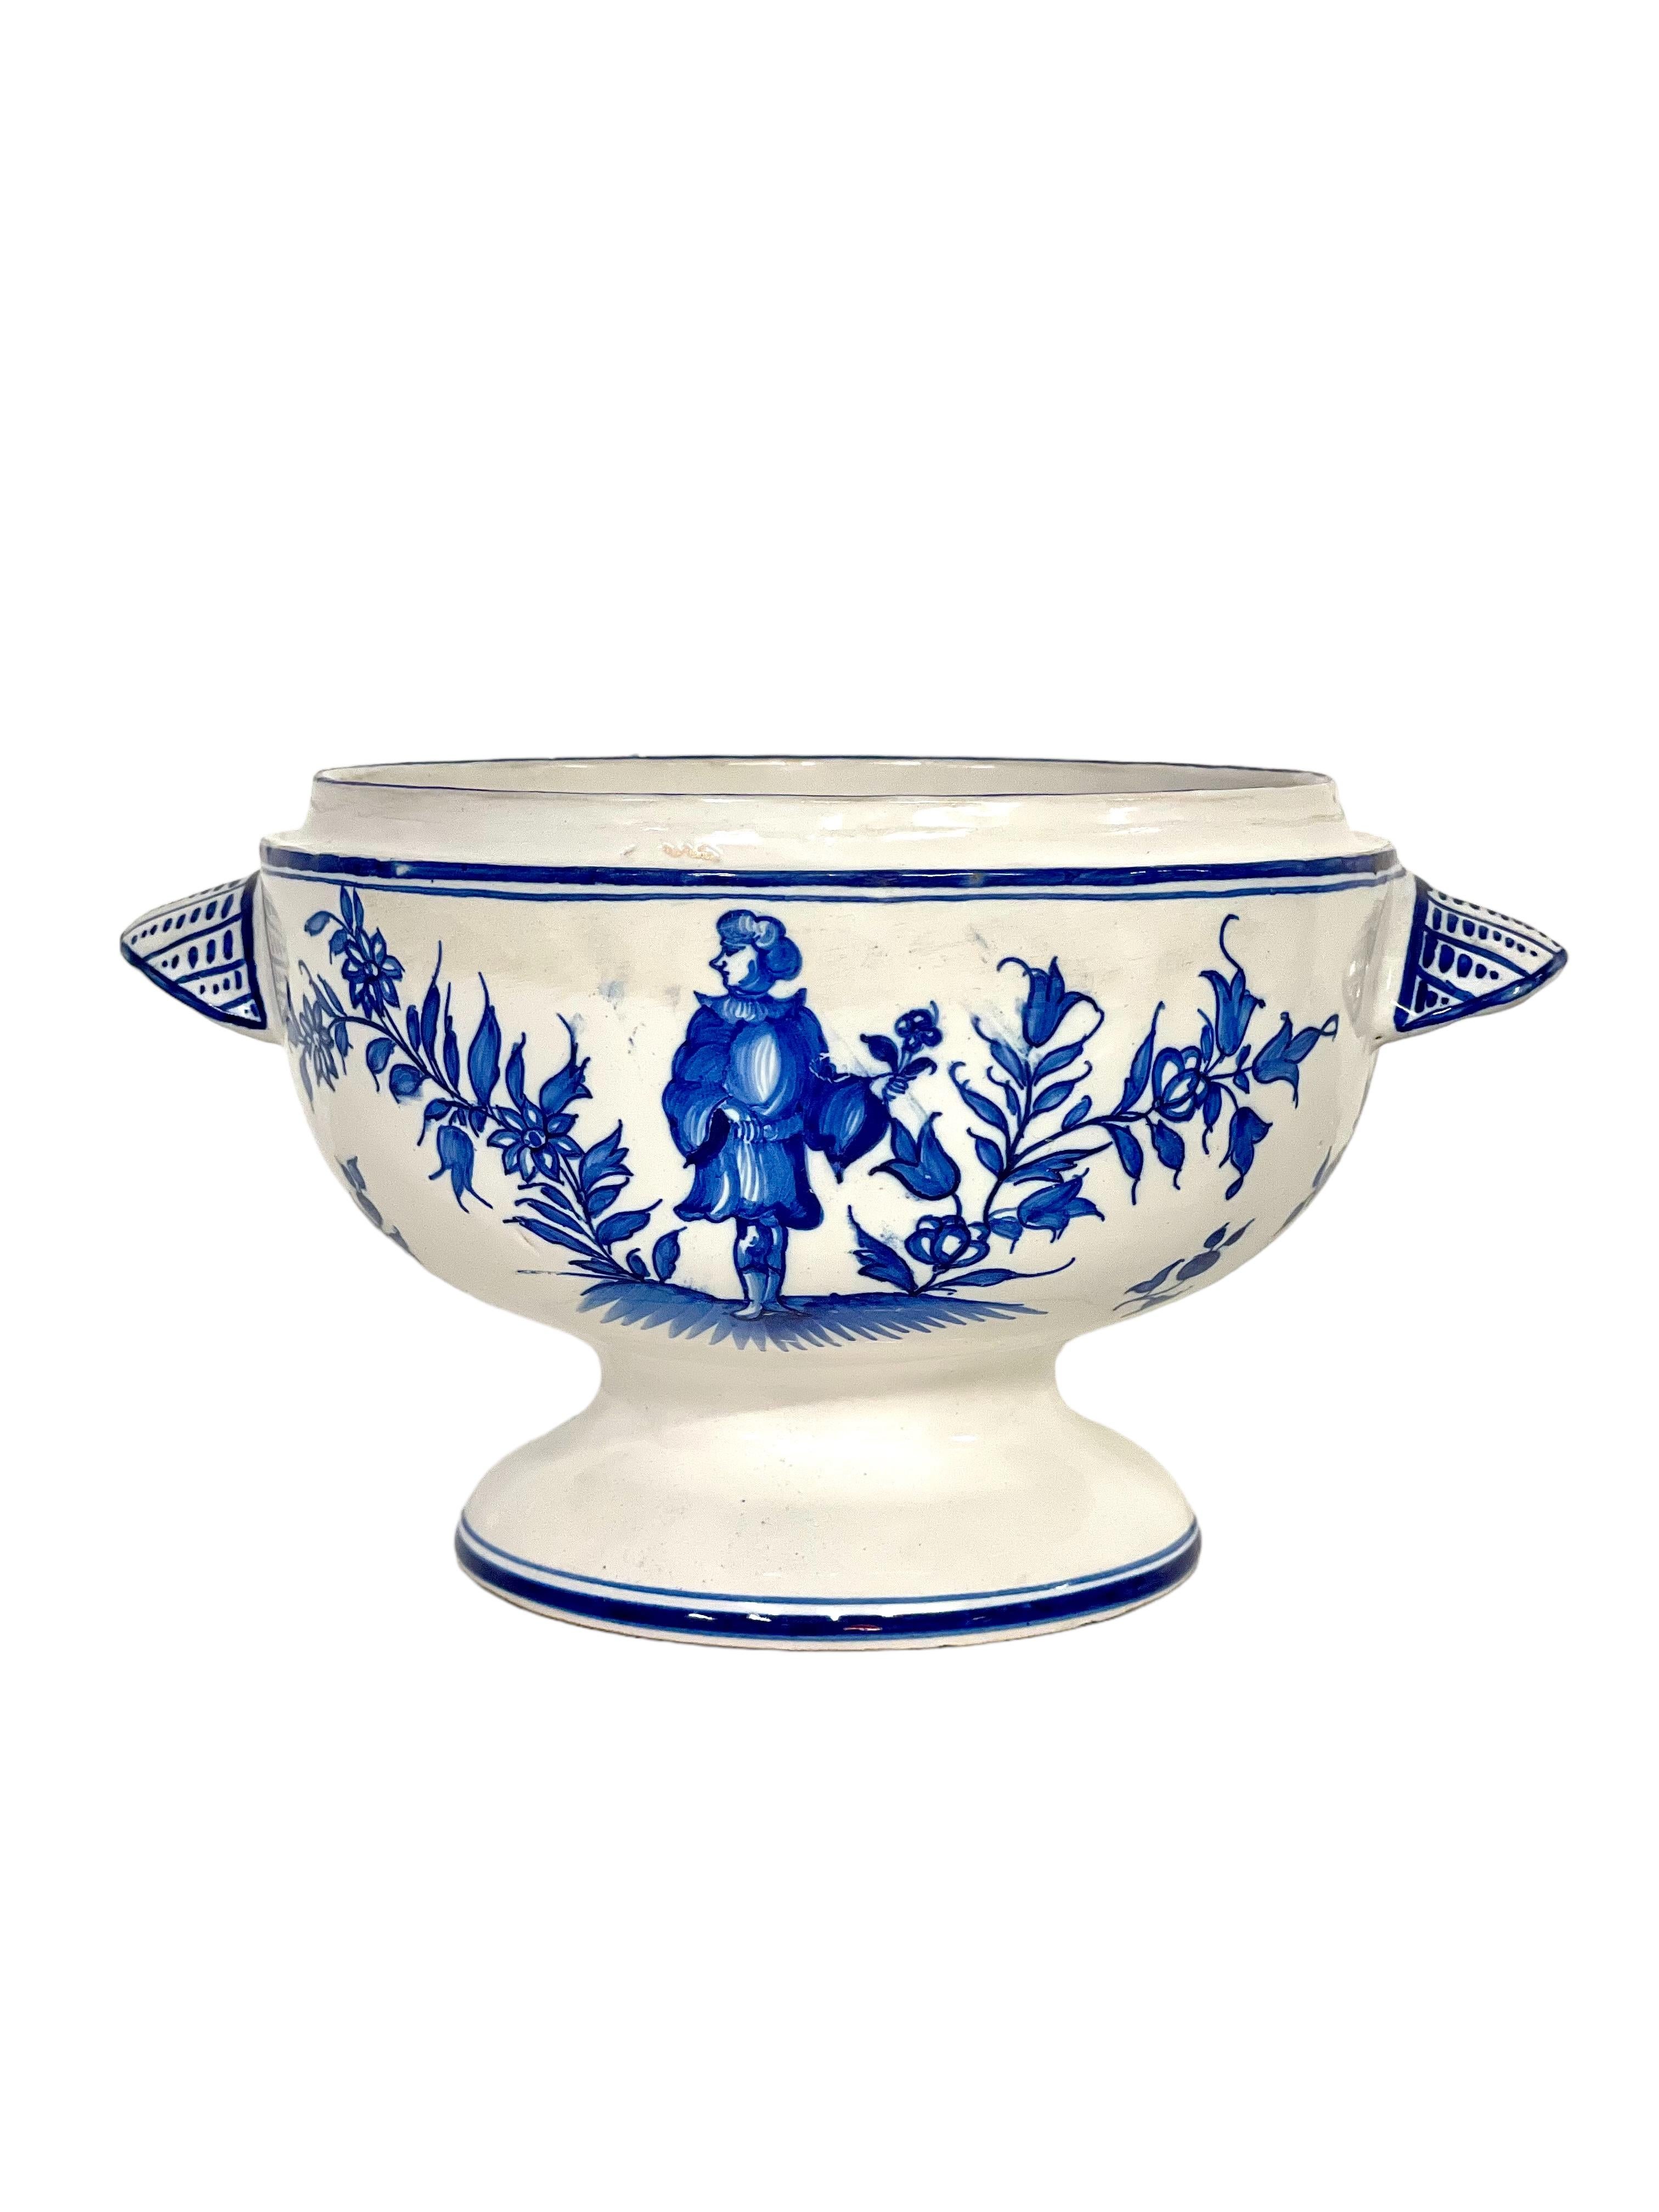 19th Century Blue and White Earthenware Lidded Tureen with Fantastical Decoration For Sale